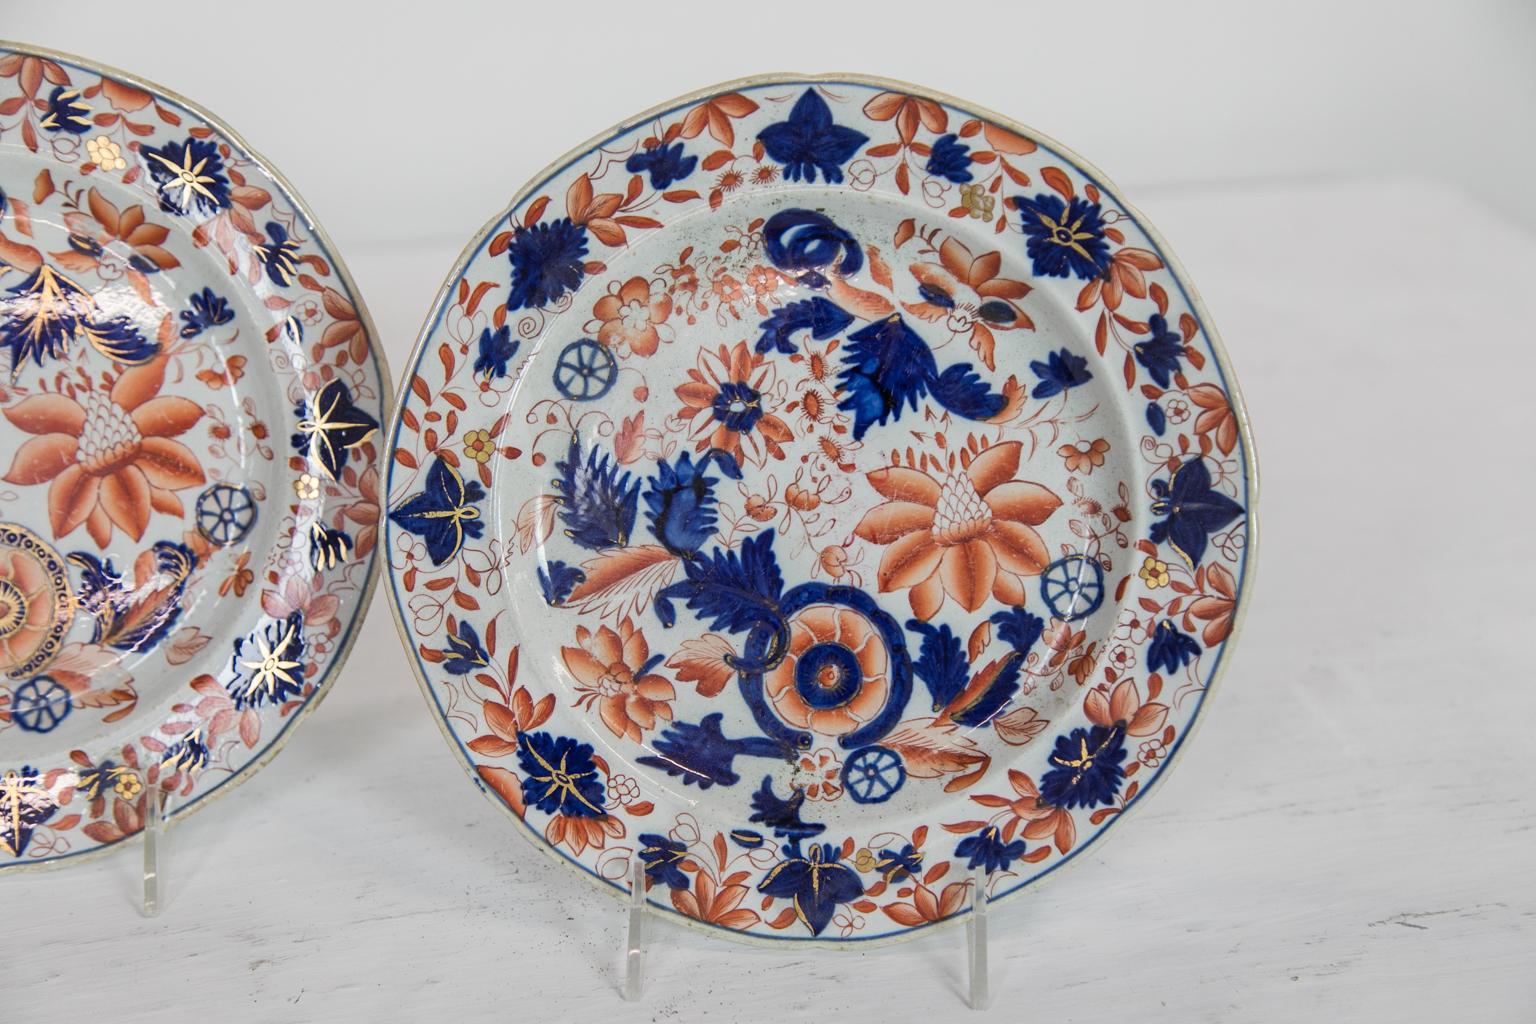 These plates have no markings, but the decoration style, glaze, style of construction, and the type of ironstone body material composition, are very consistent with that of the earliest Mason's ironstone examples. The design motifs are also typical